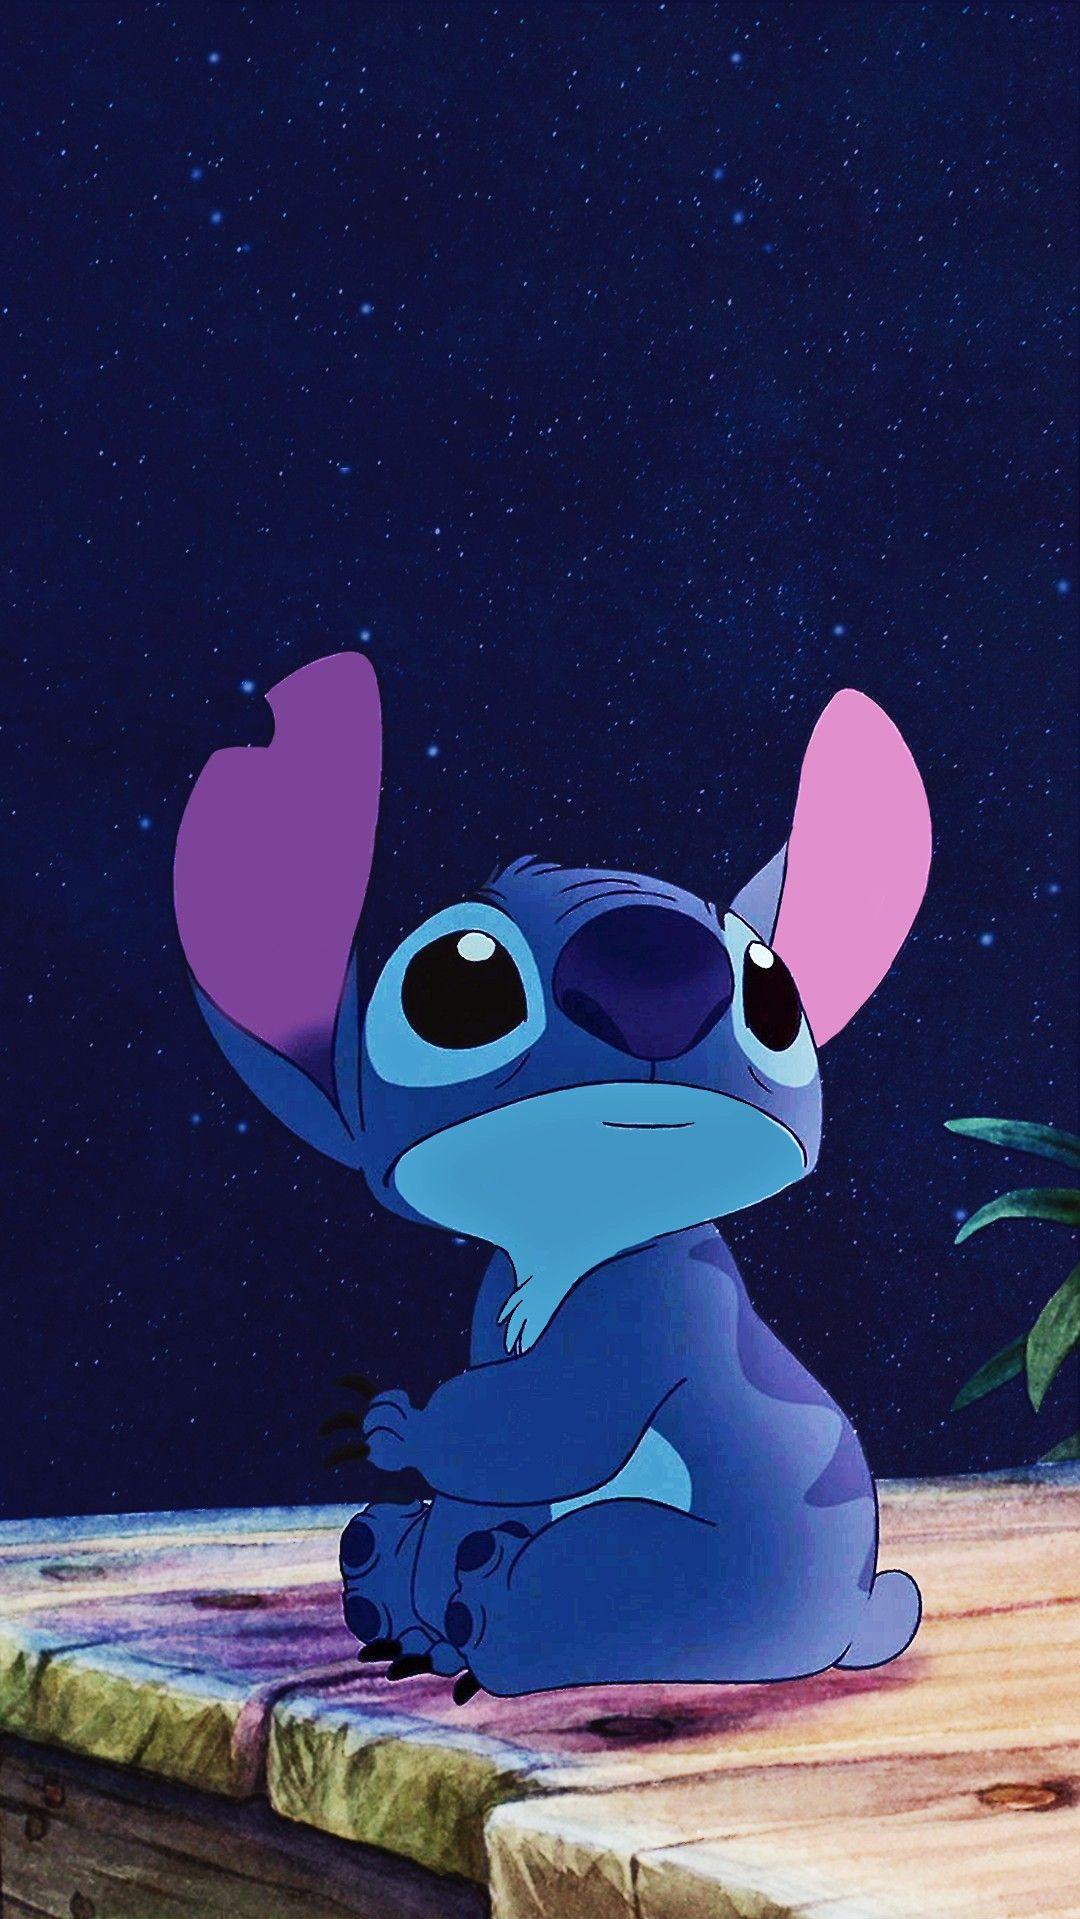 Lovely Lilo And Stitch iPhone Wallpaper Cute Cartoon